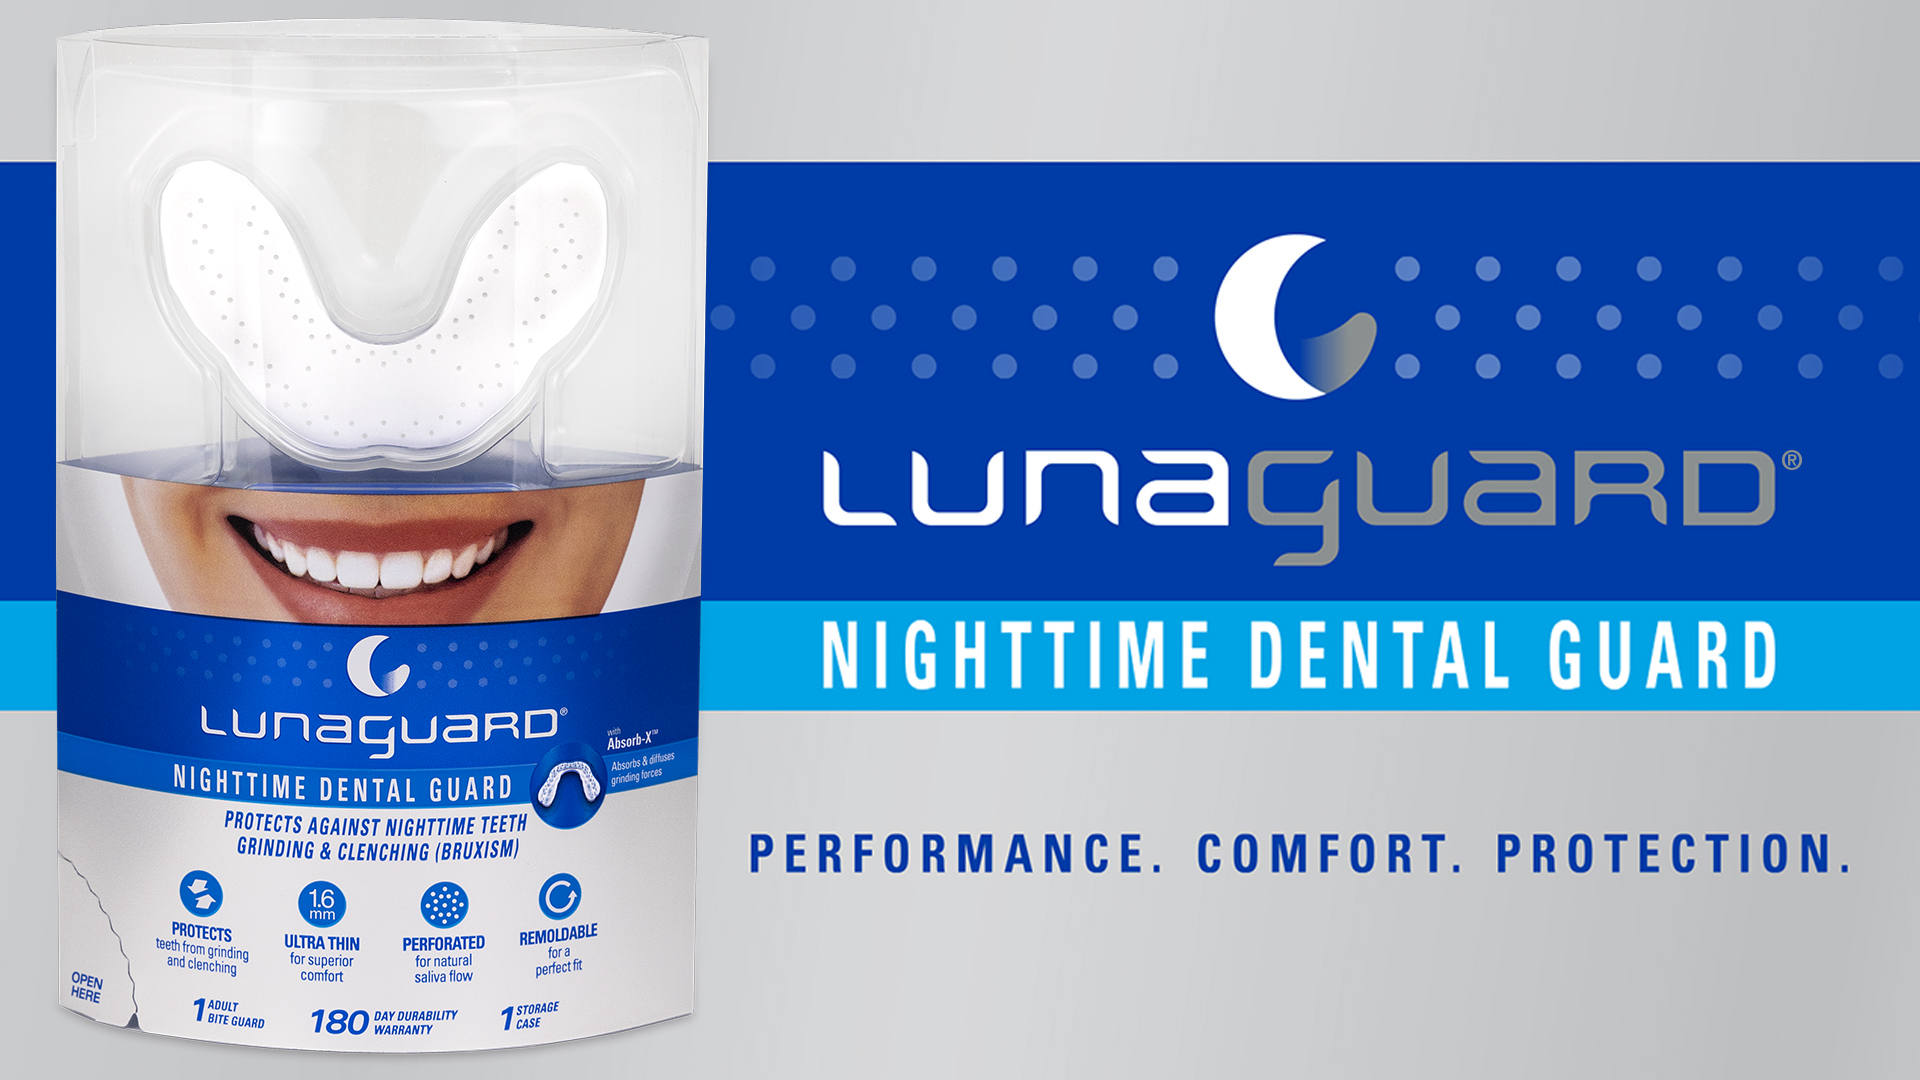 How to use lunaguard nighttime dental guard for teeth clenching and teeth grinding